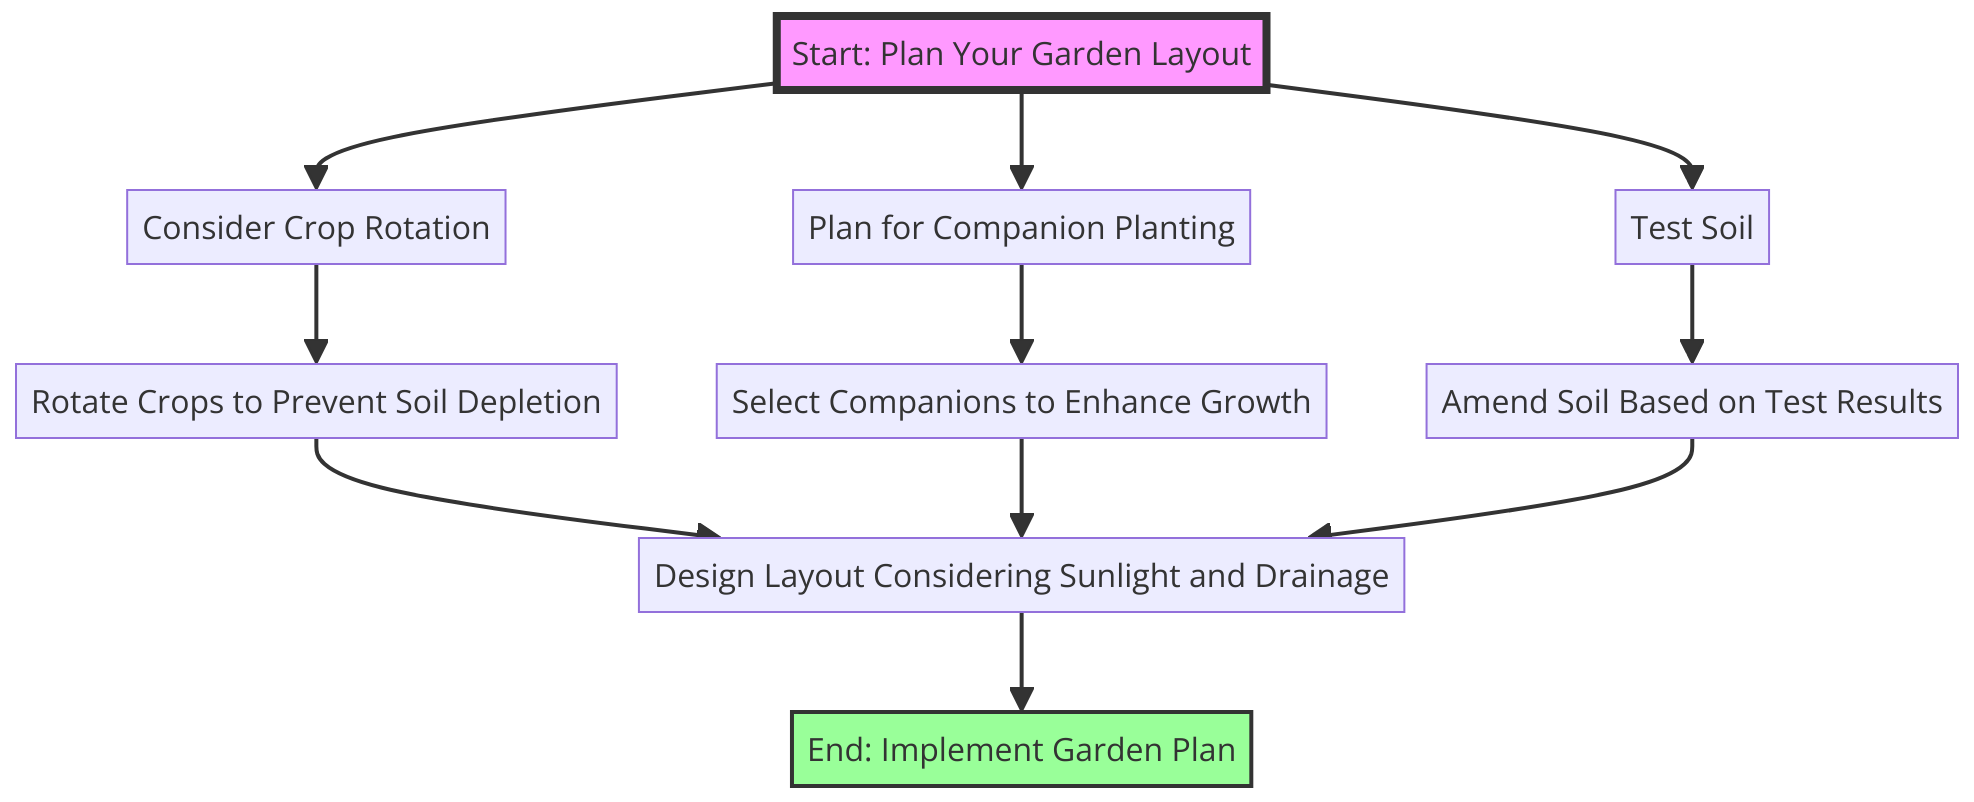 a flowchart guiding readers through the process of planning their garden layout, including steps for testing soil, planning for companion planting, and considering crop rotation